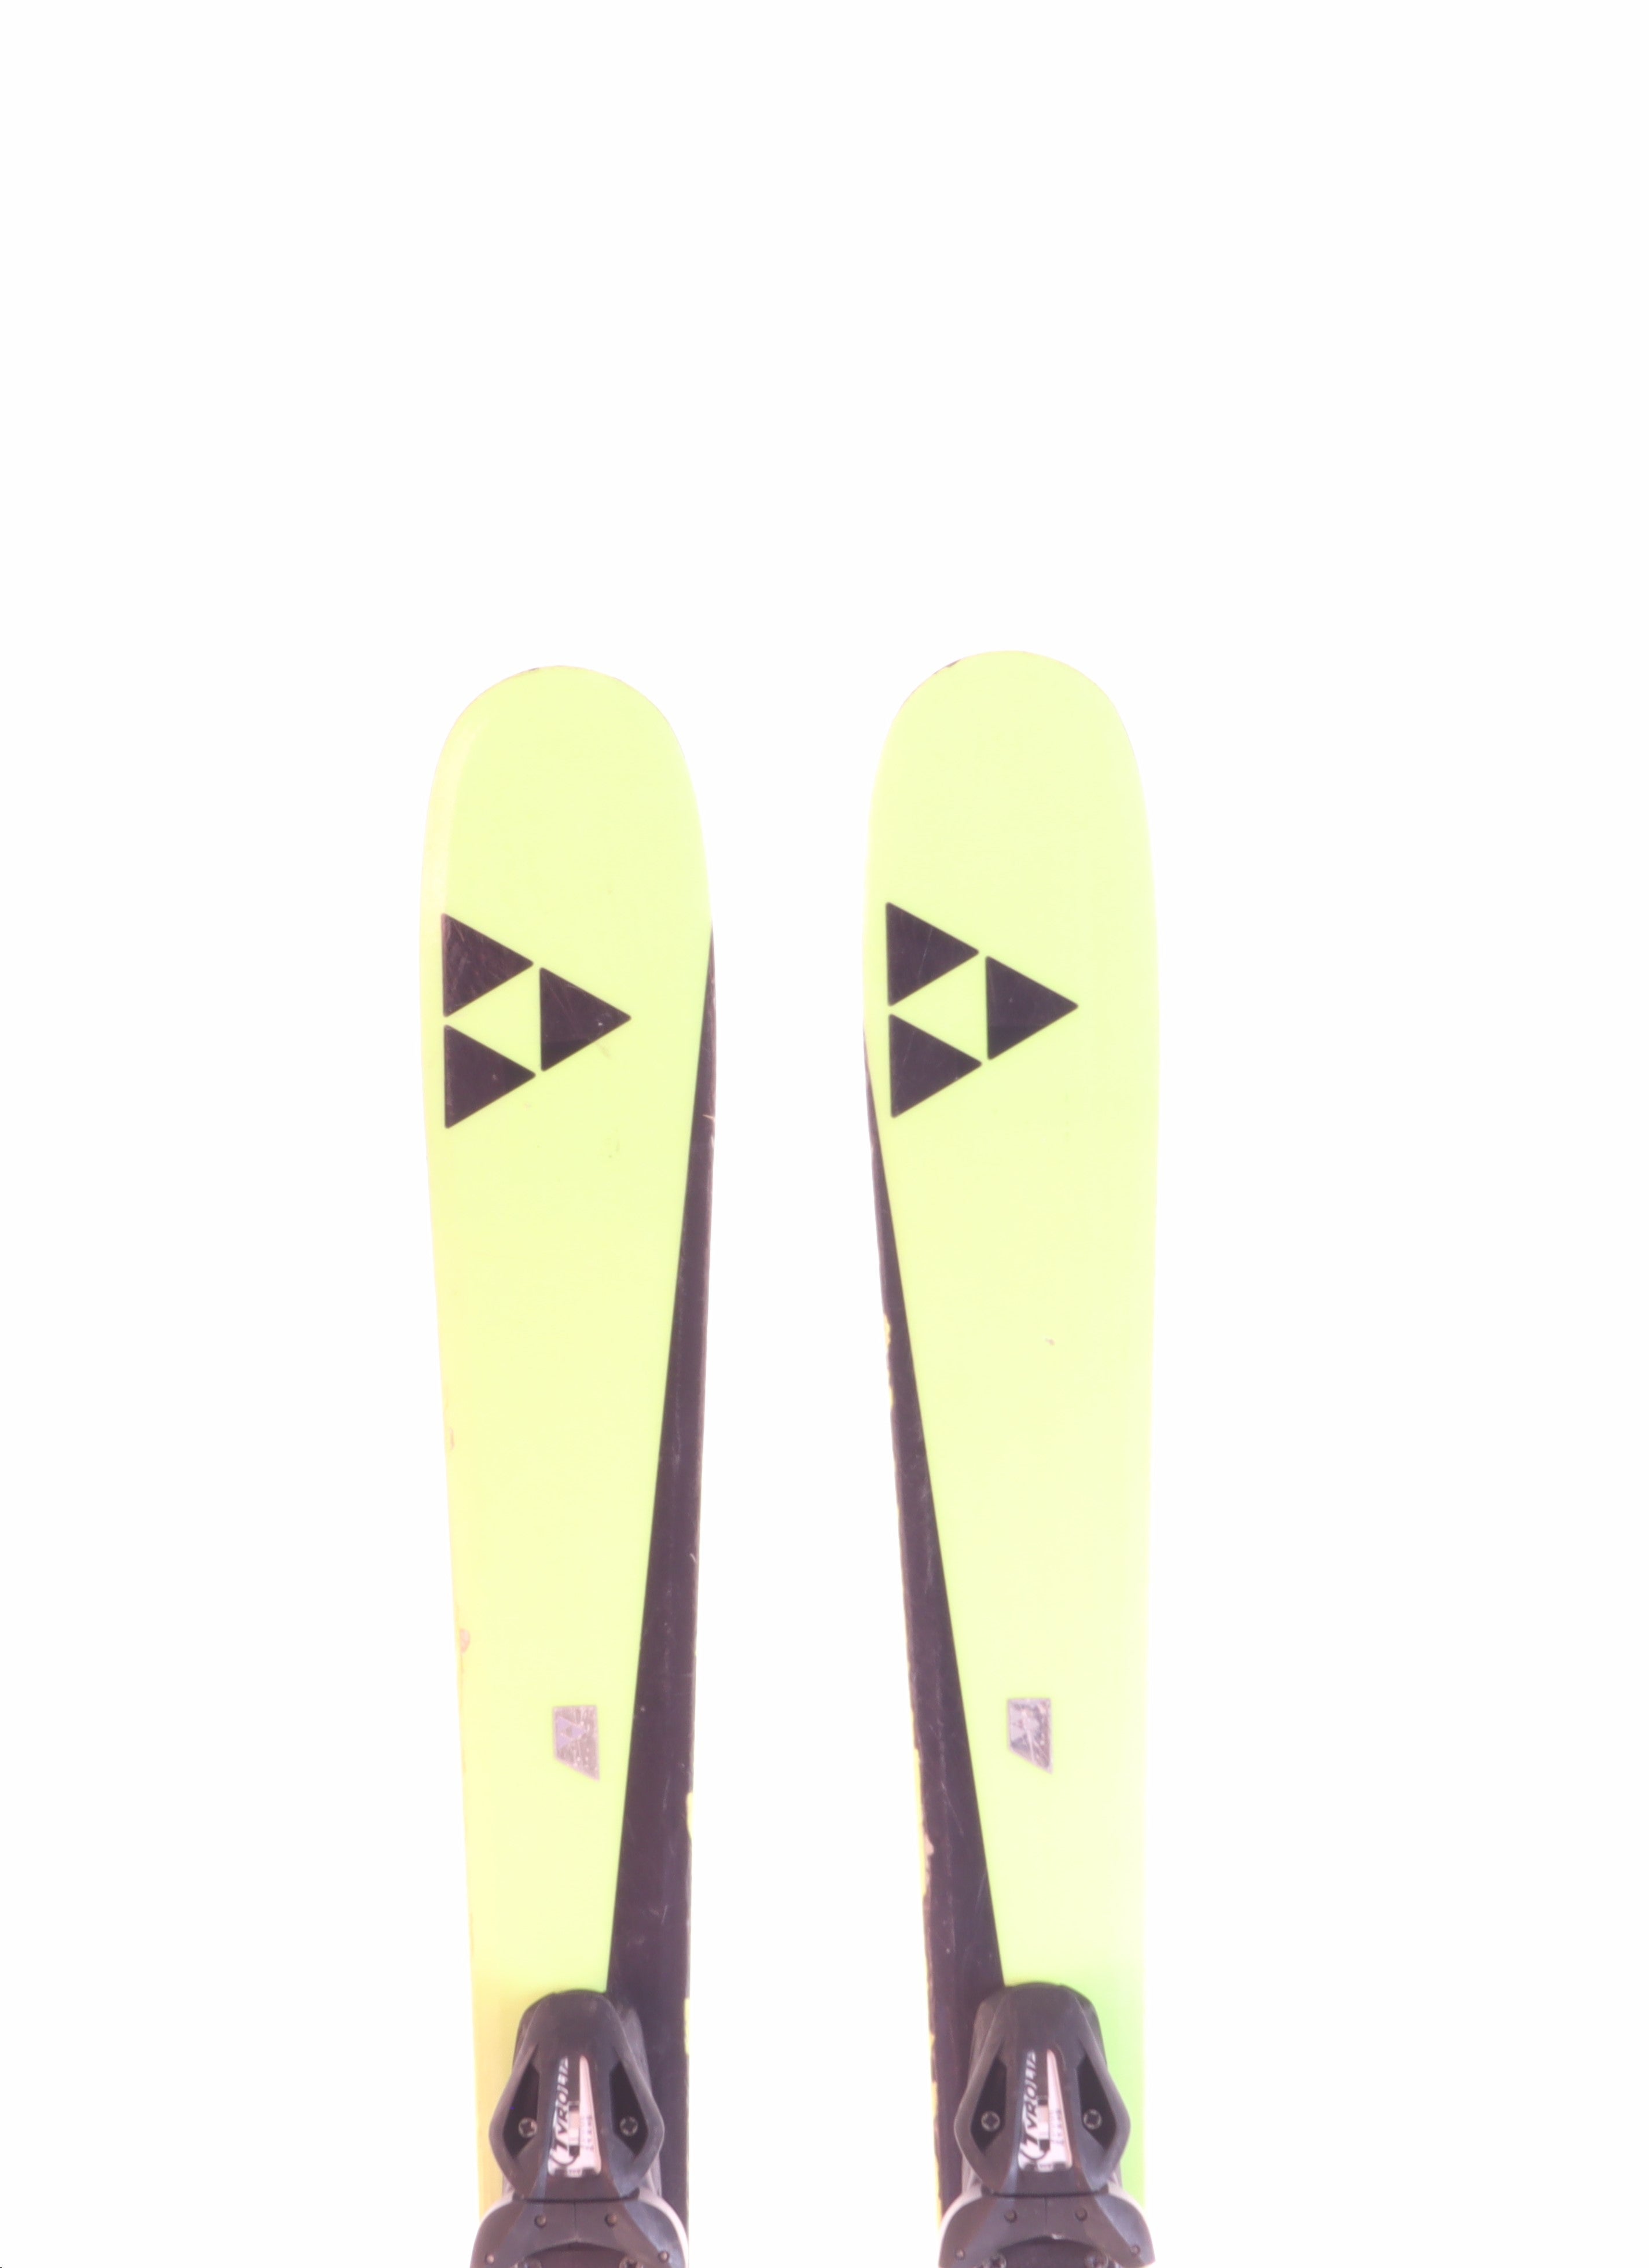 Used Fischer 172cm Ranger Skis With Look SPX 10 Bindings (SY1350 